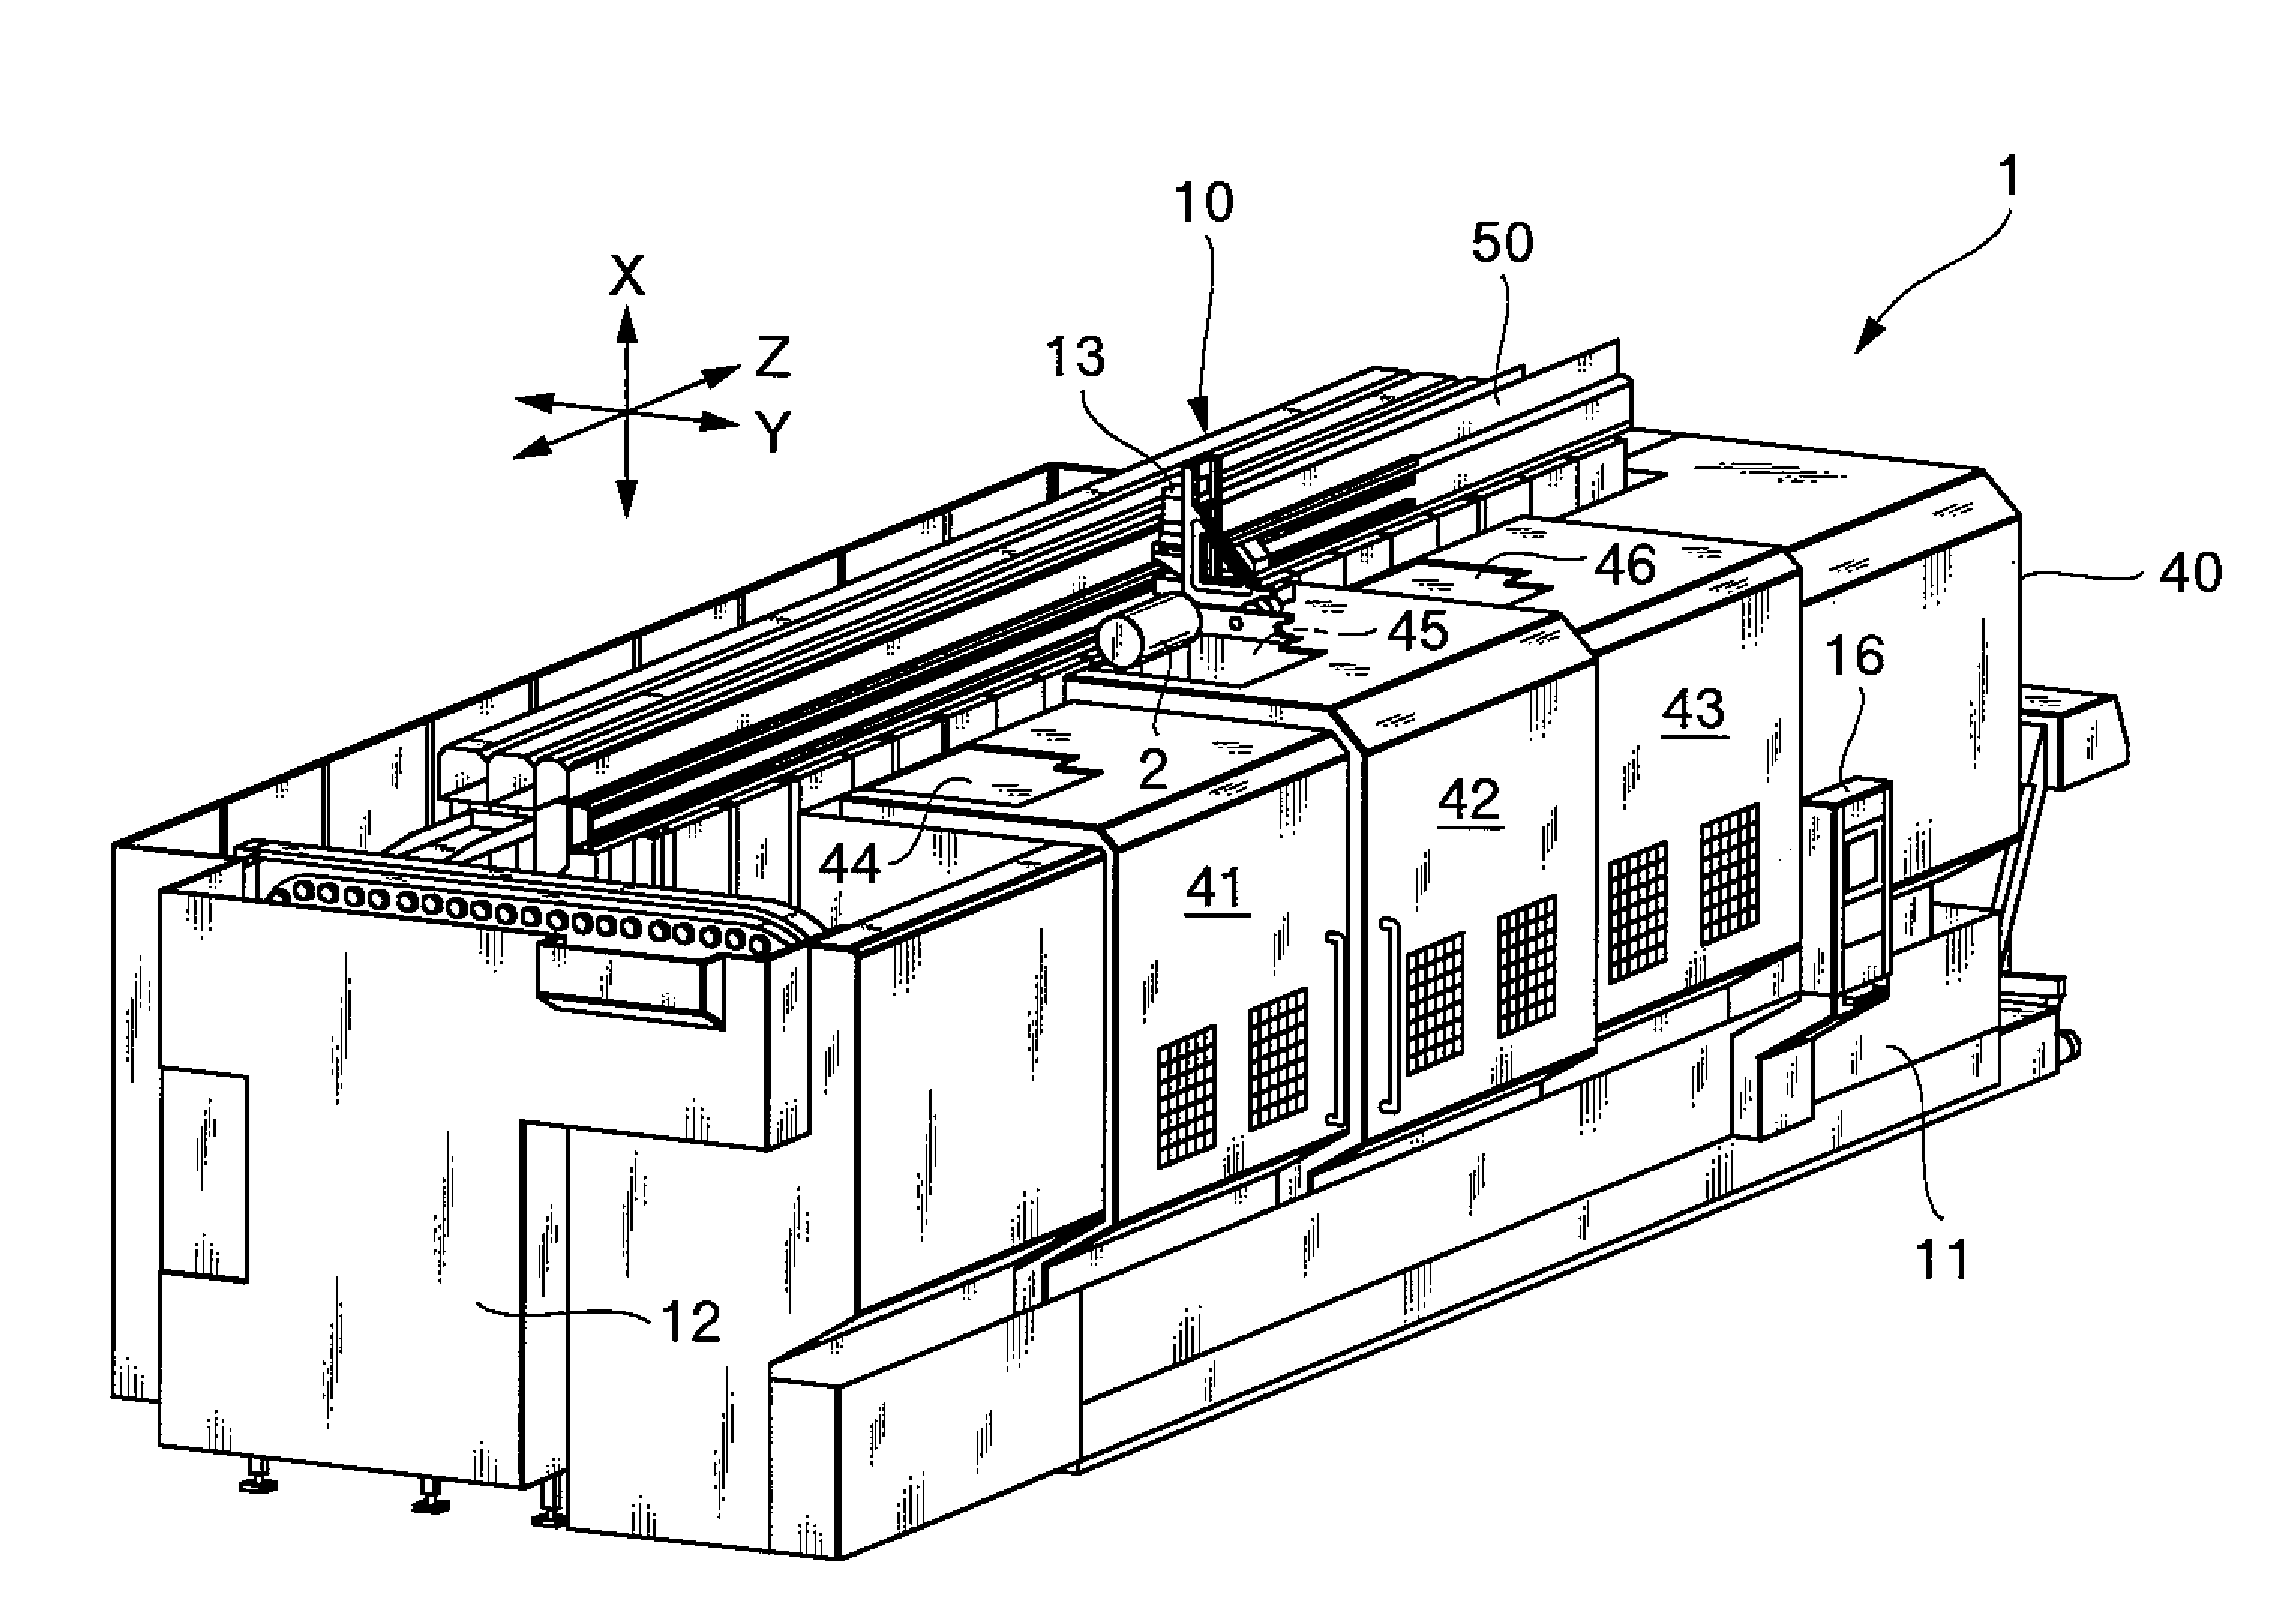 Machine tool with automatic tool changer